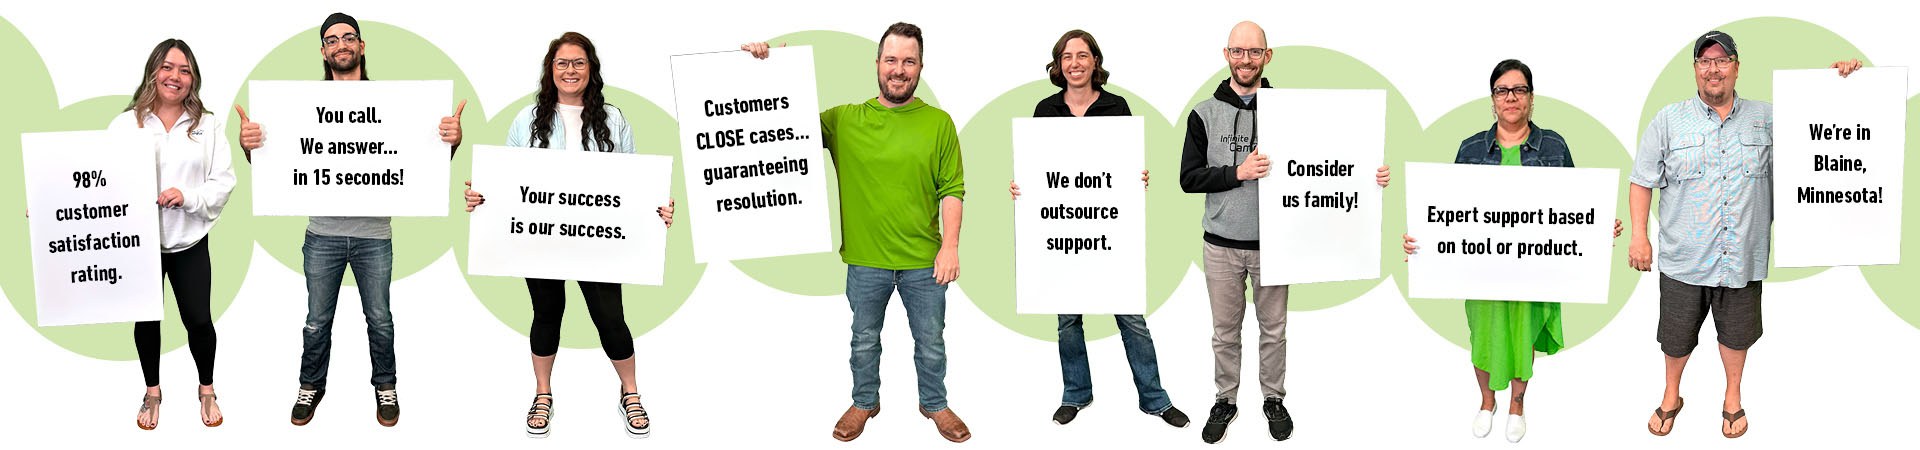 Support representatives holding signs: 98% customer satisfaction rating. You call. We answer in 15 seconds! Your success is our success. Online, phone, submit a case, user groups. We don't outsource support. Consider us family! Expert support based on tool or product. We're in Blaine, Minnesota!